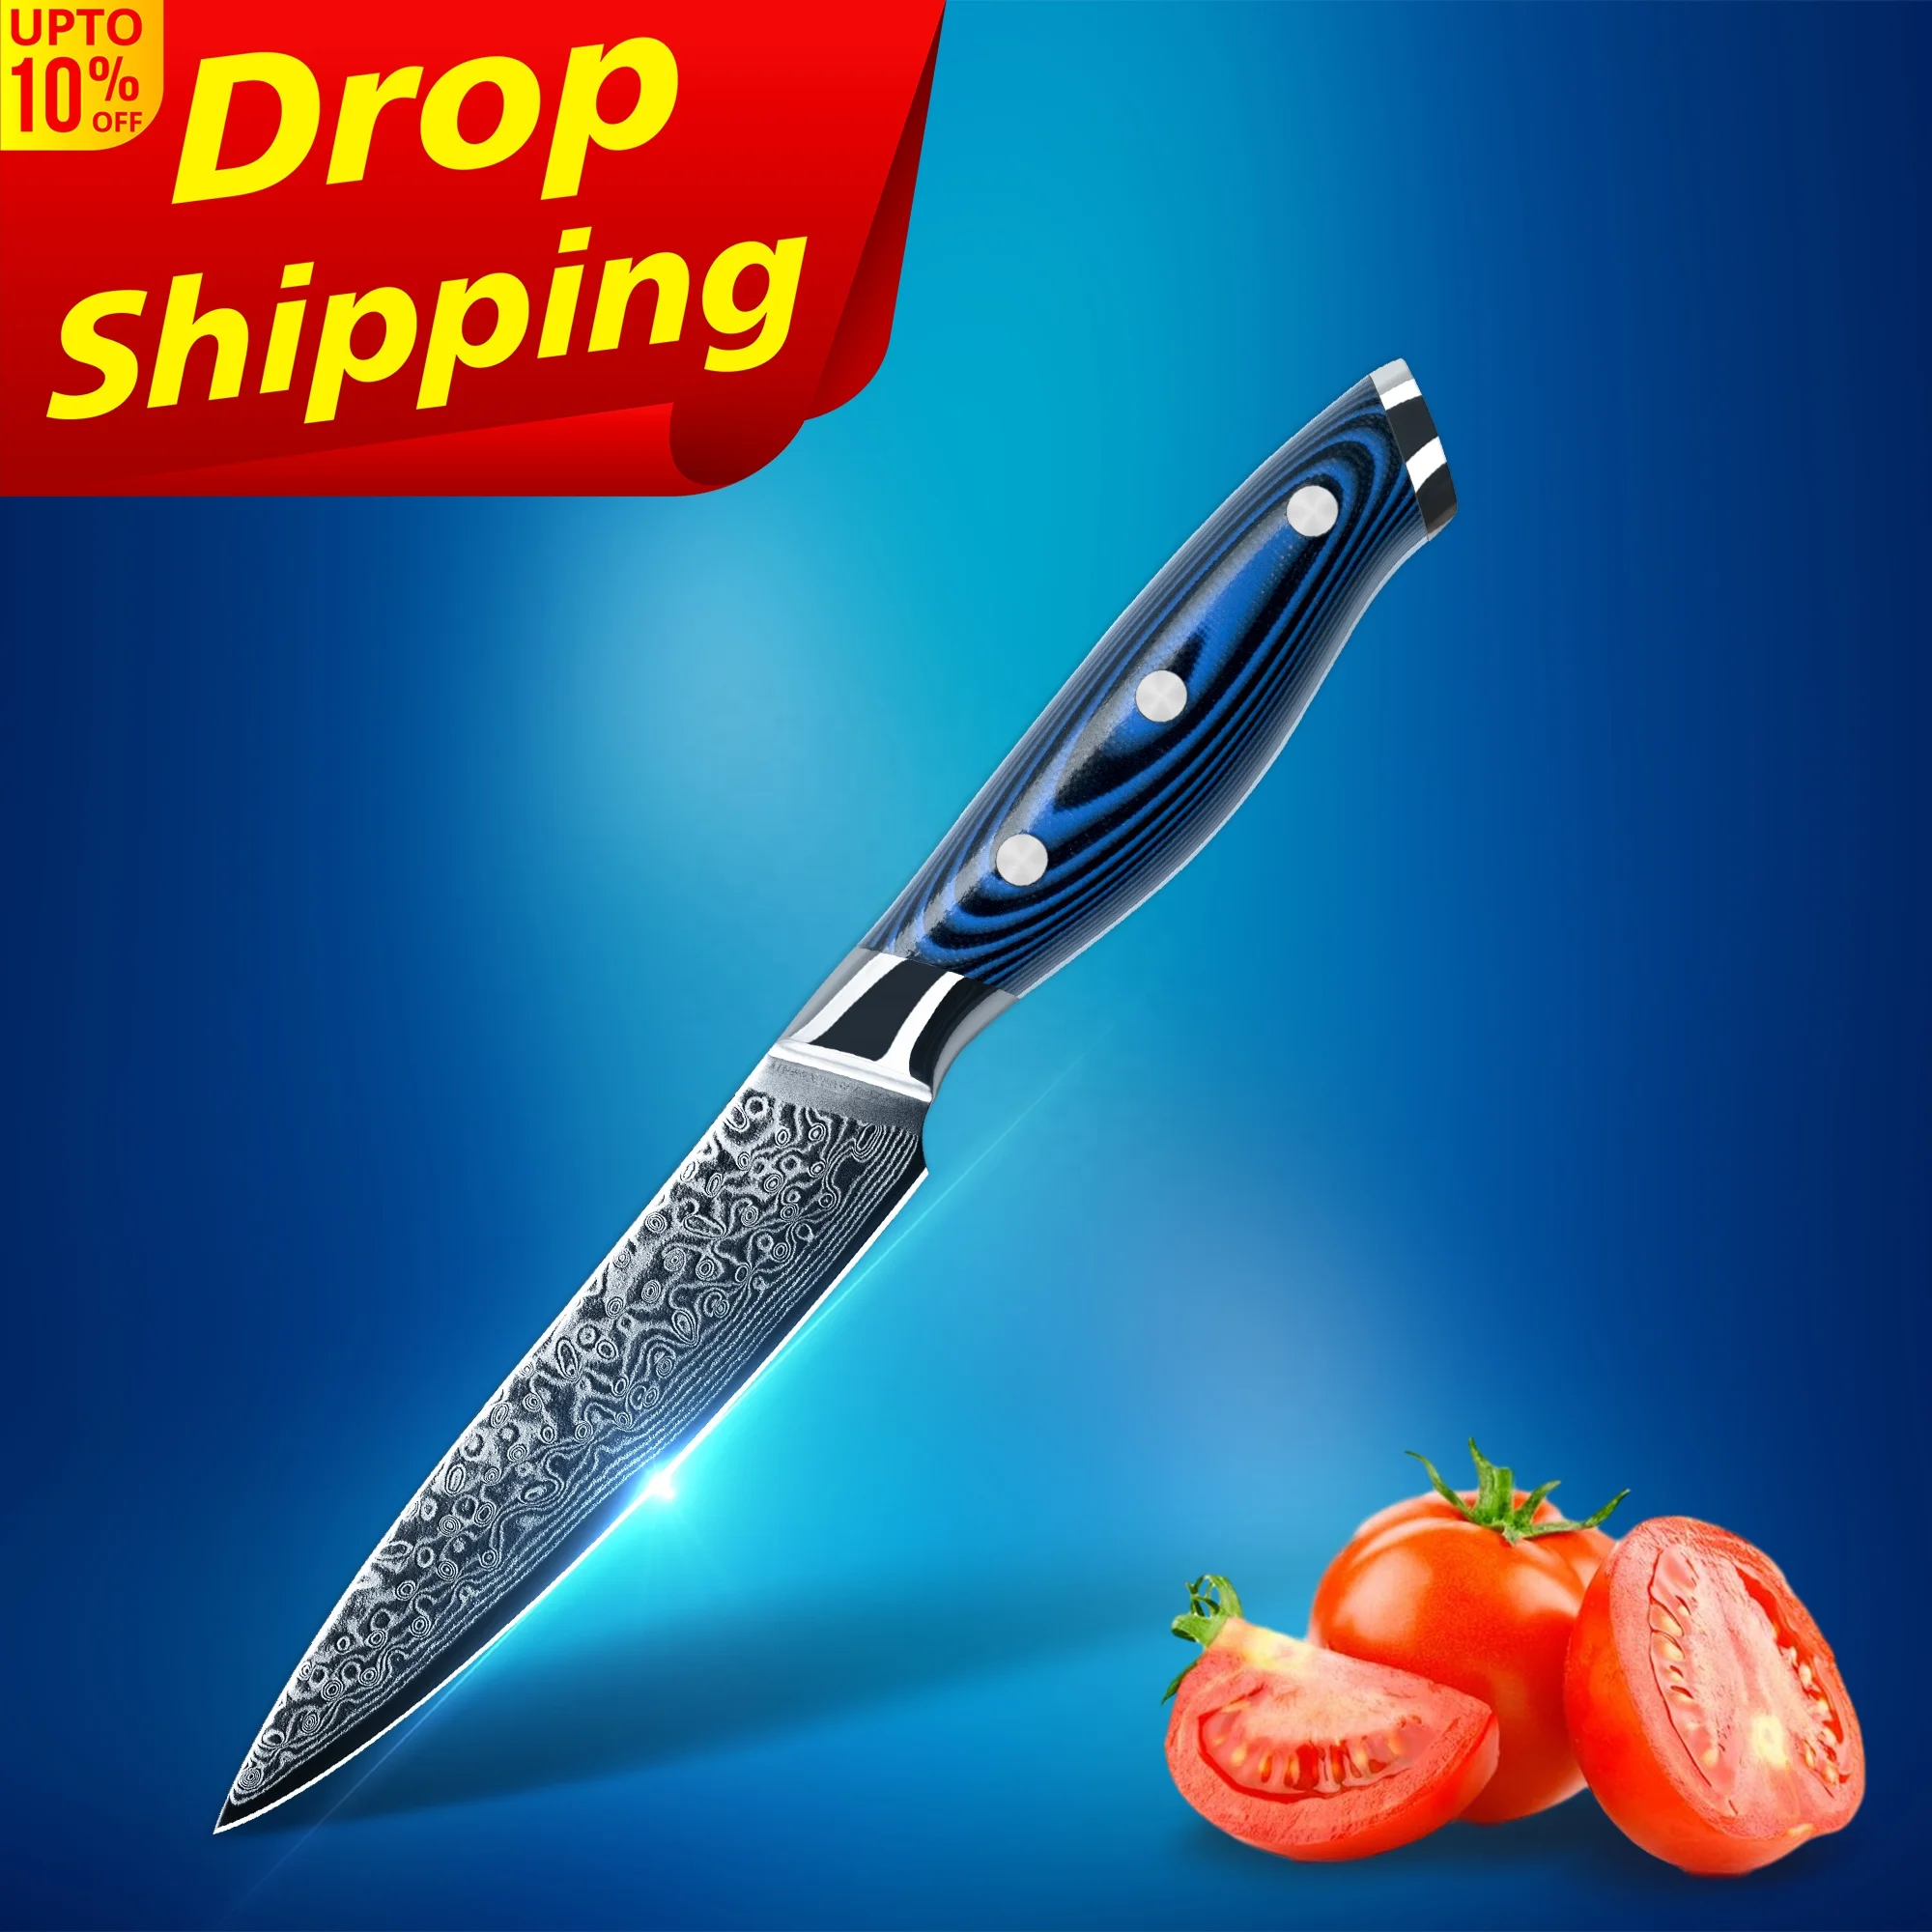 

10% off SkyCook 5 Inch Damascus 67 Layers vg10 buy steak knives steak knife set steak knives with Blue G10 Handle